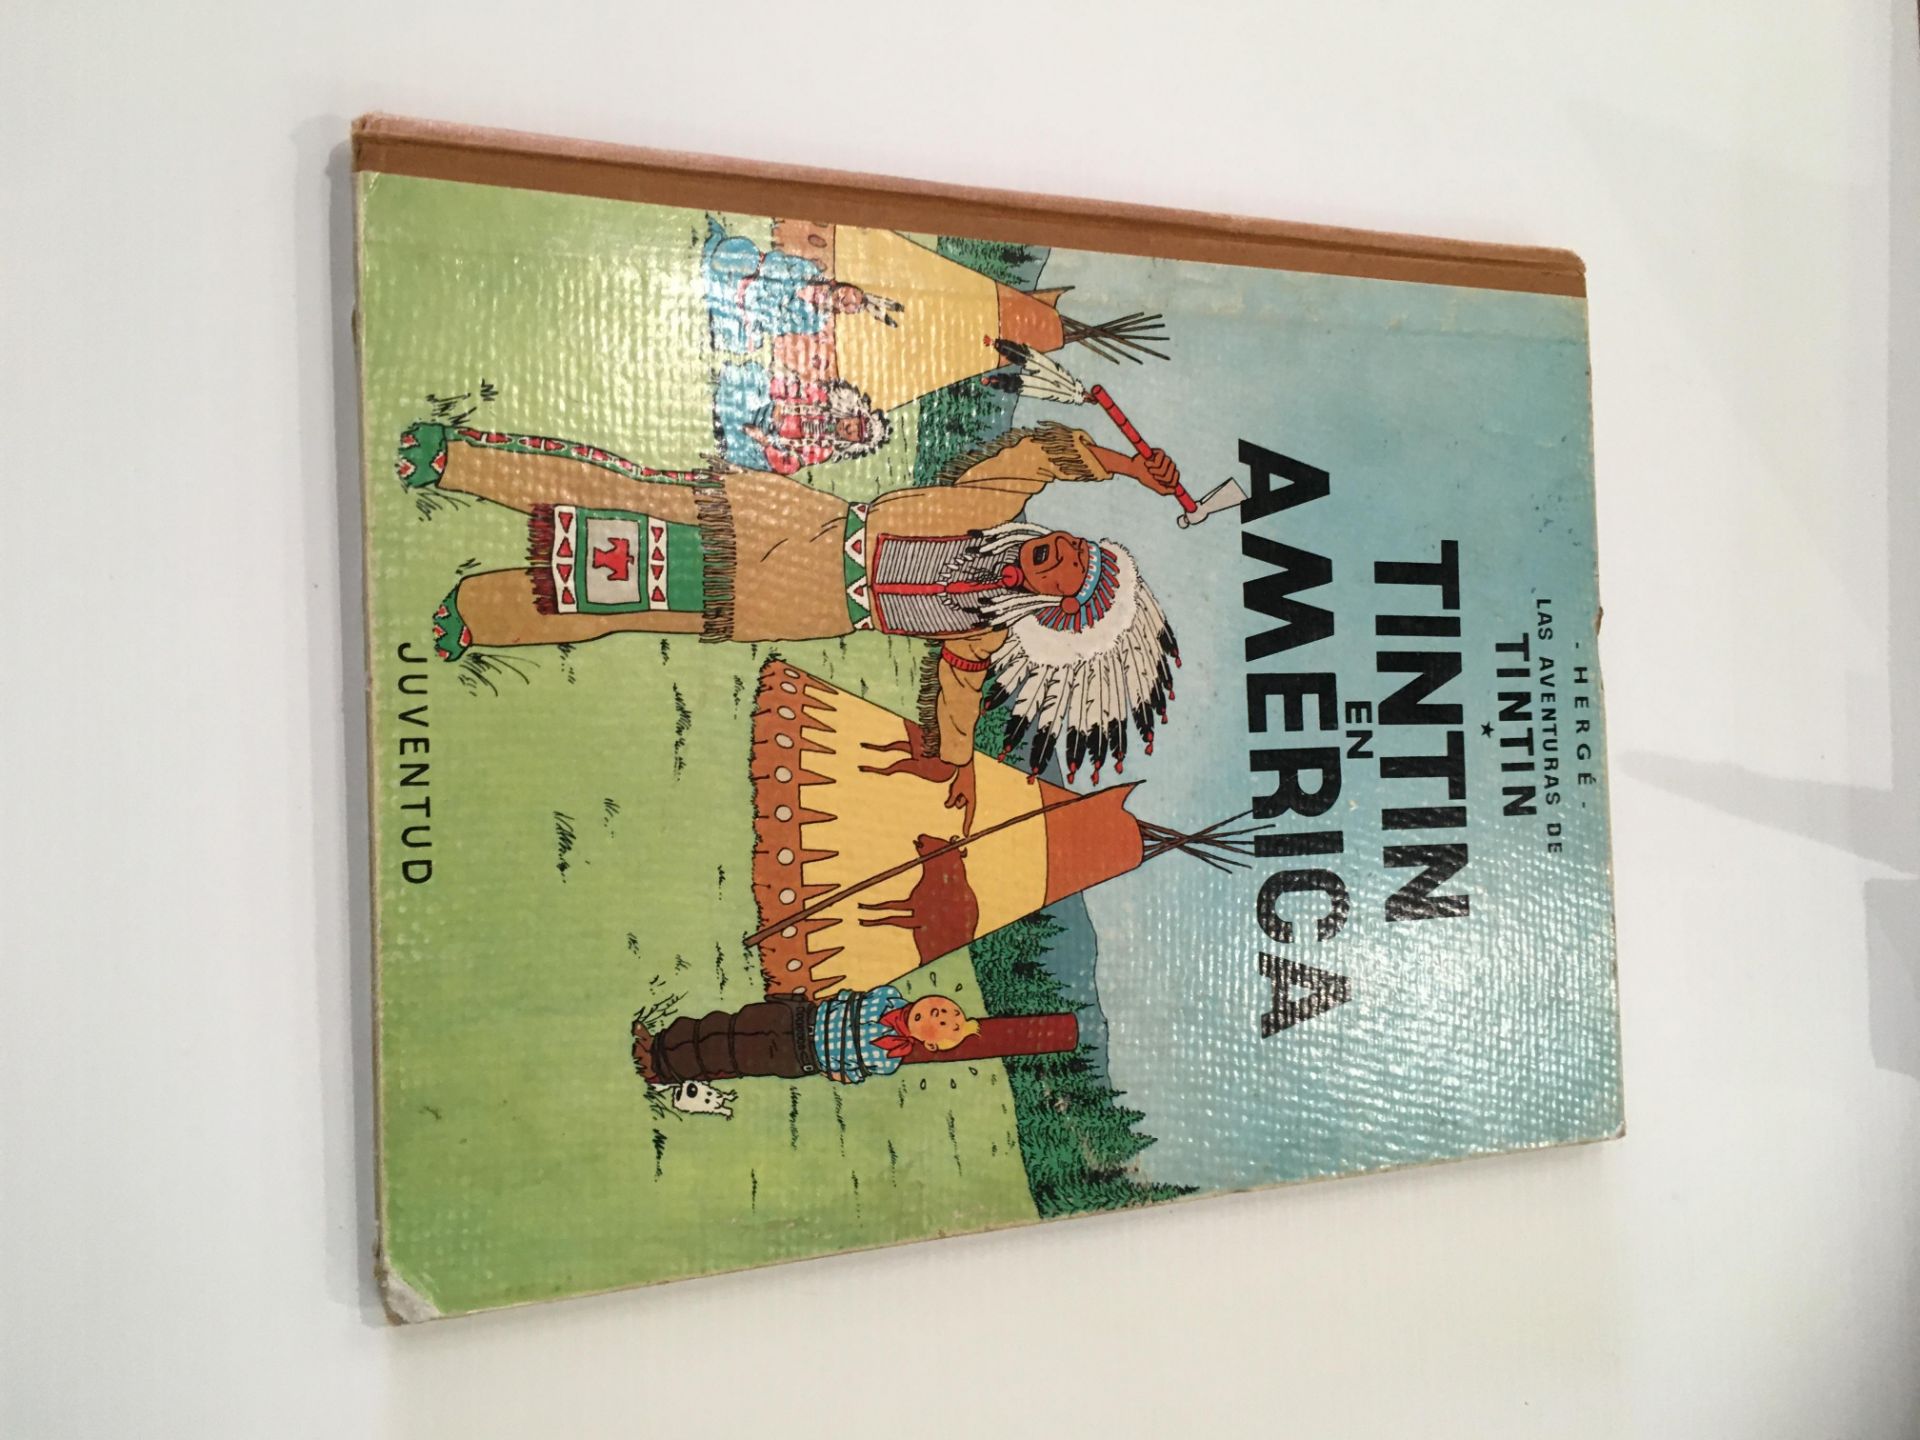 Contents to box 22 childrens books and annuals including a quantity of Herge Adventures of Tin Tin, - Image 11 of 14